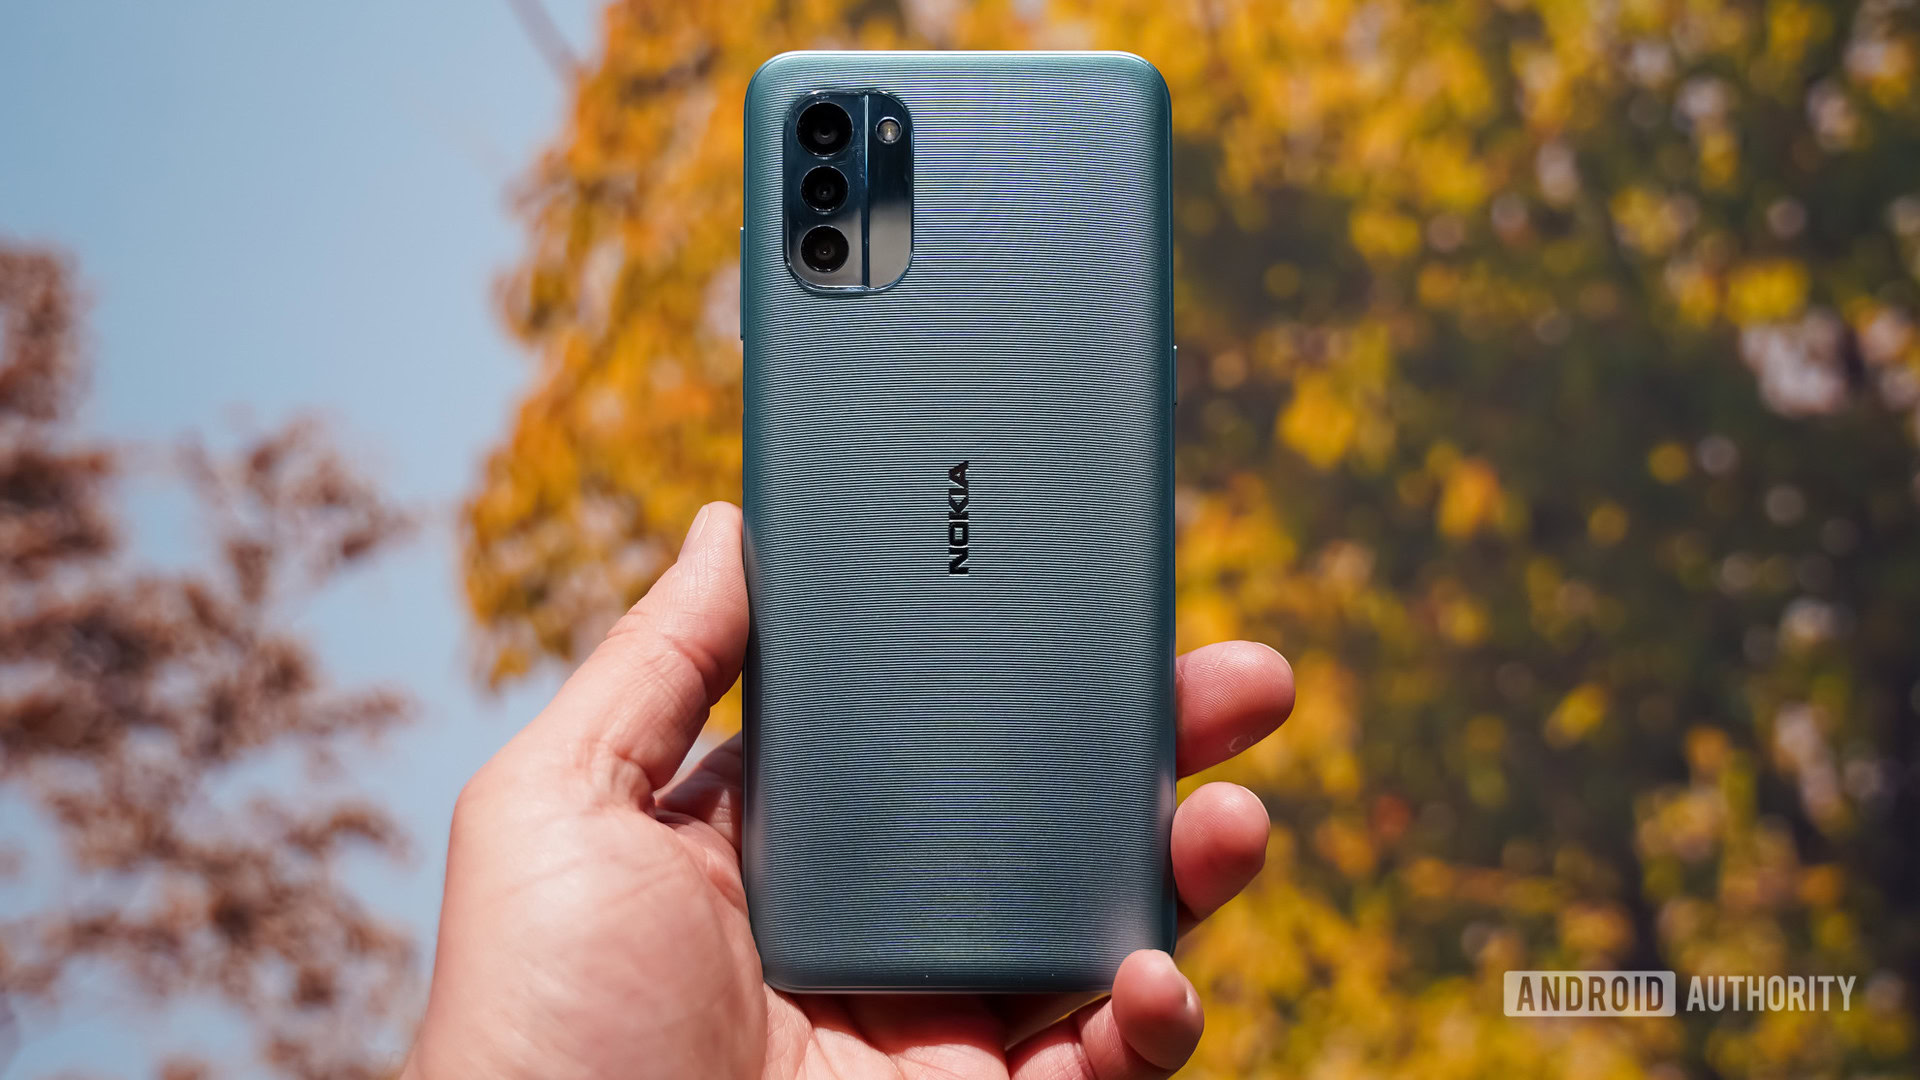 HMD Global Nokia G11 rear panel in hand